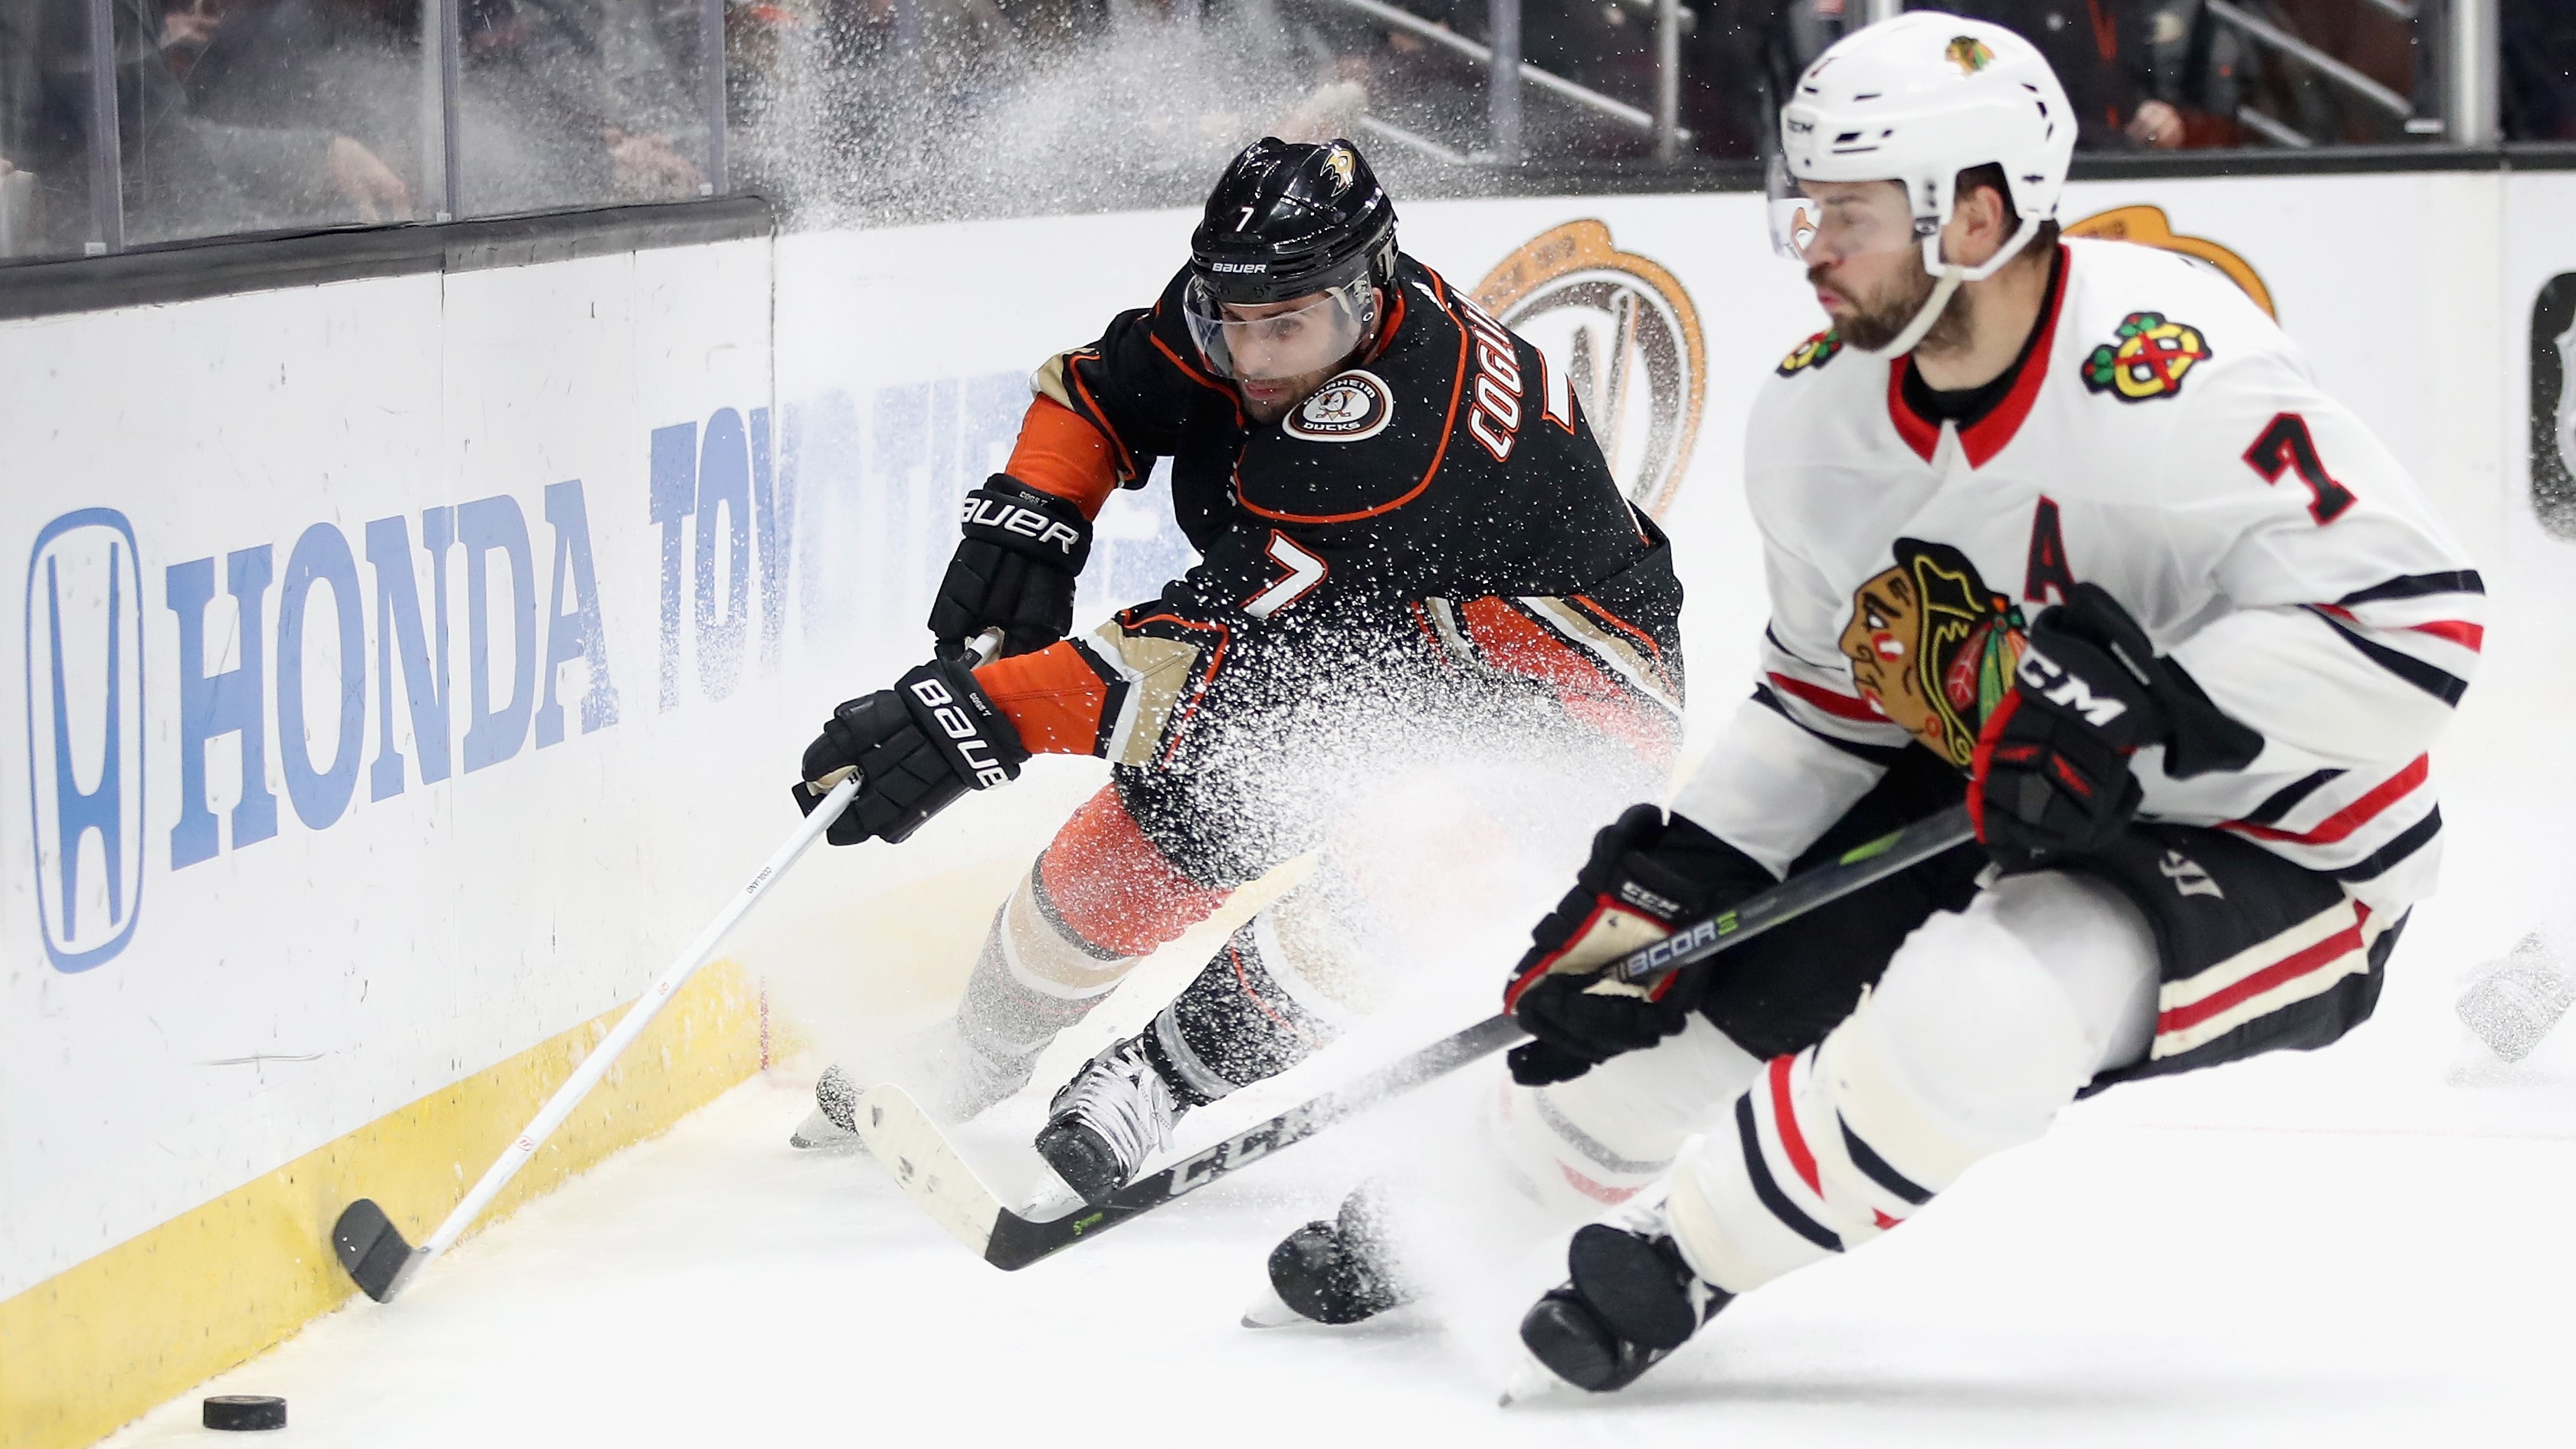 NHL Turns To Amagi For FAST Channel Creation, Distribution TV Tech